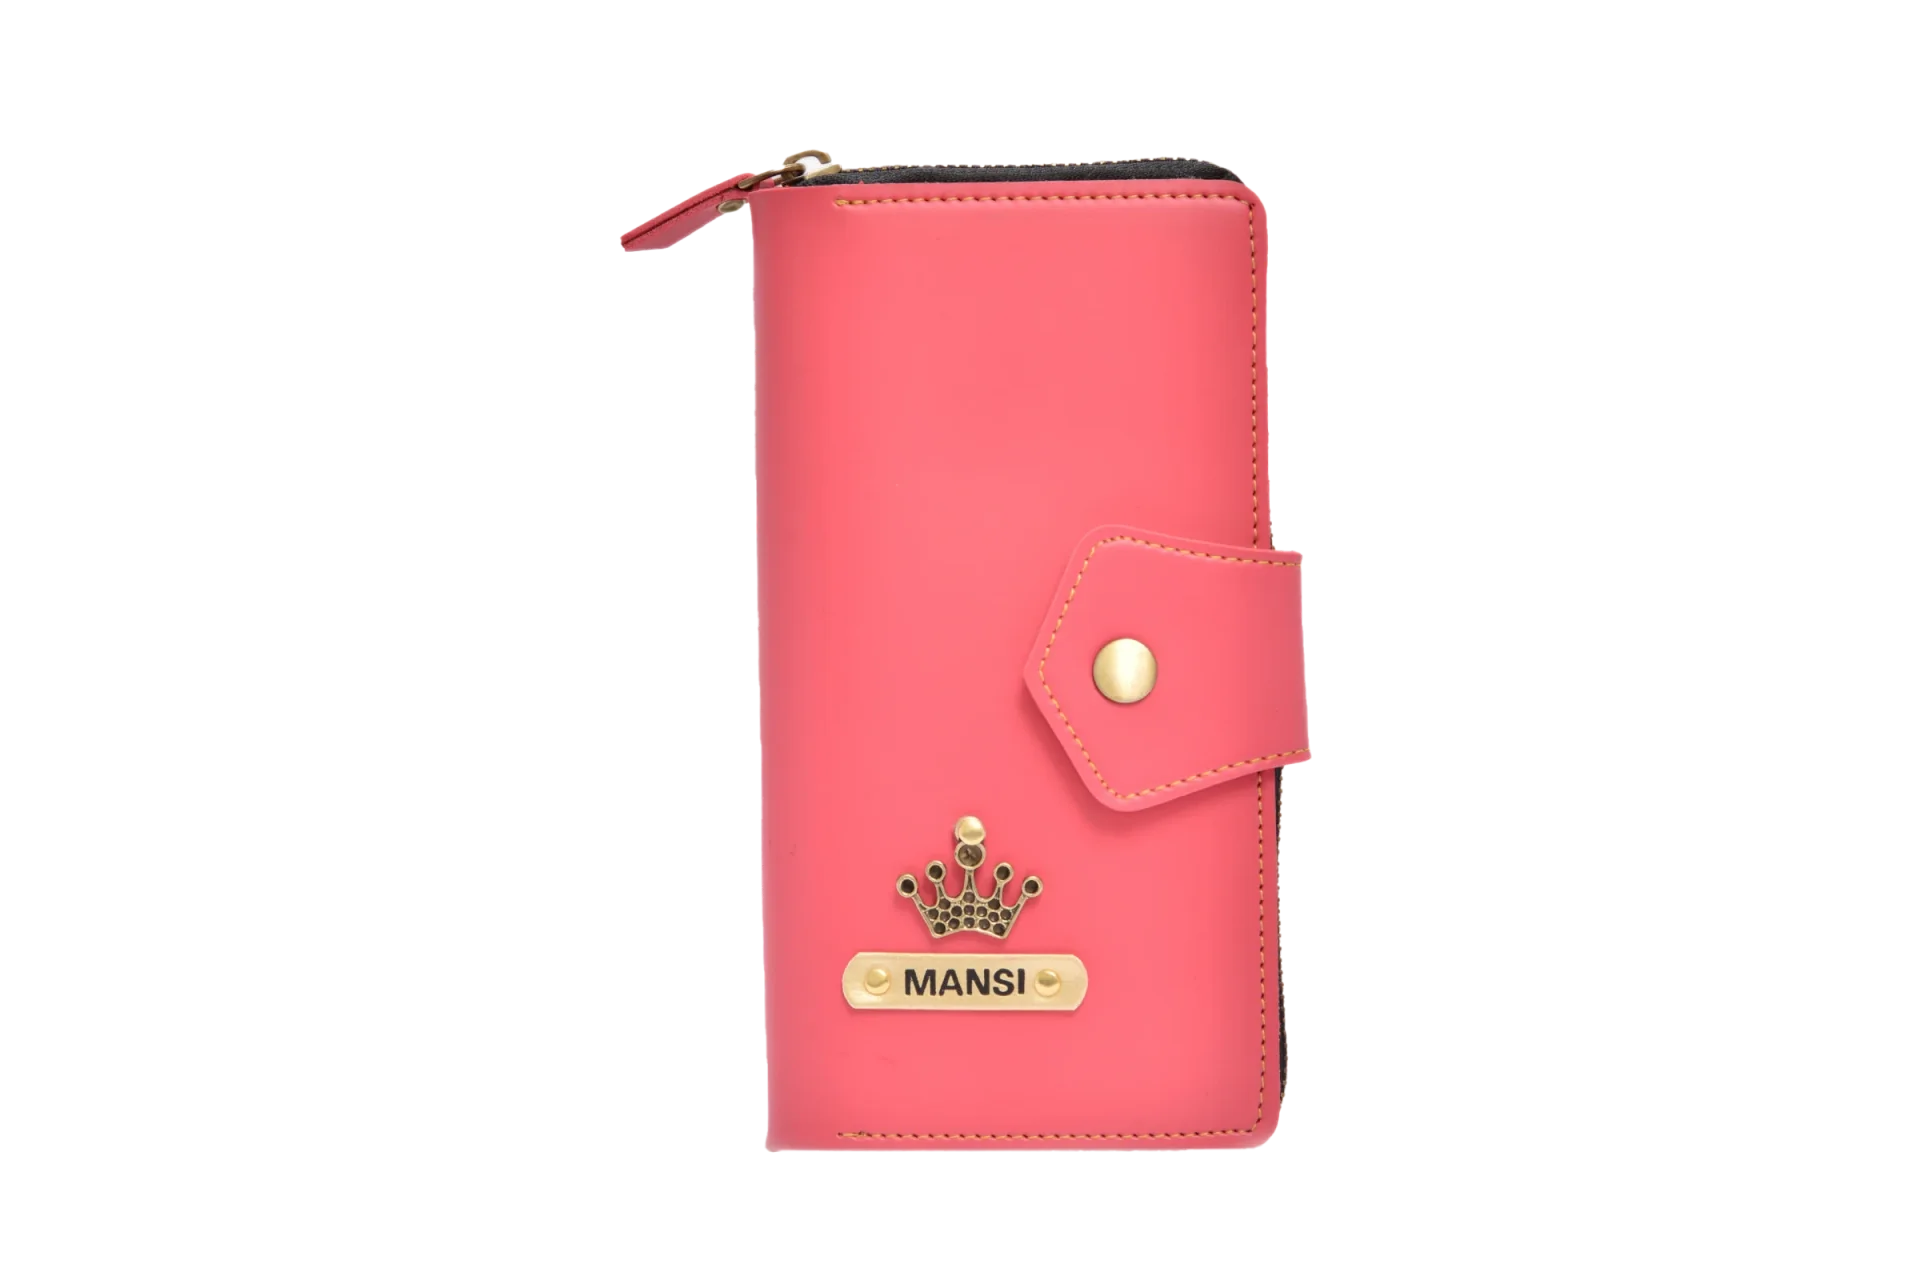 With a spacious interior and durable construction, this zip around lady wallet is both practical and stylish.